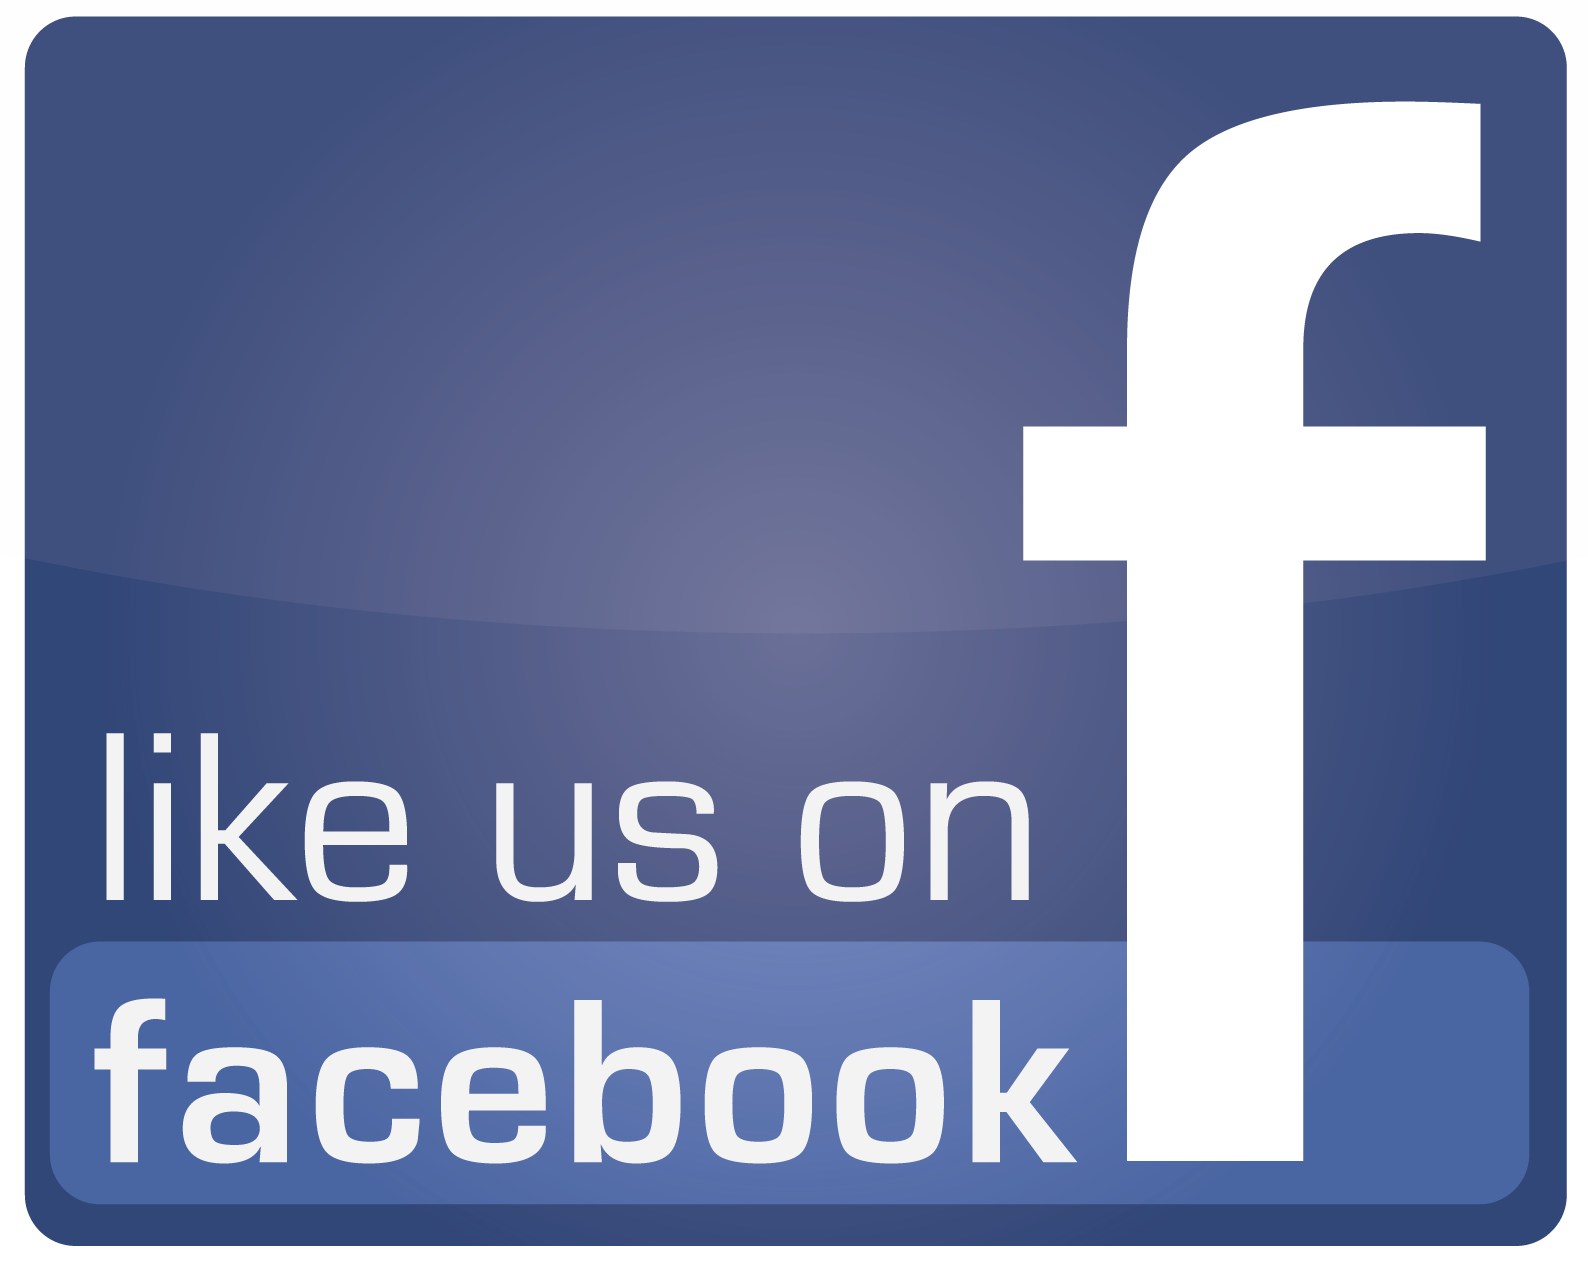 Click here to like our Facebook page!